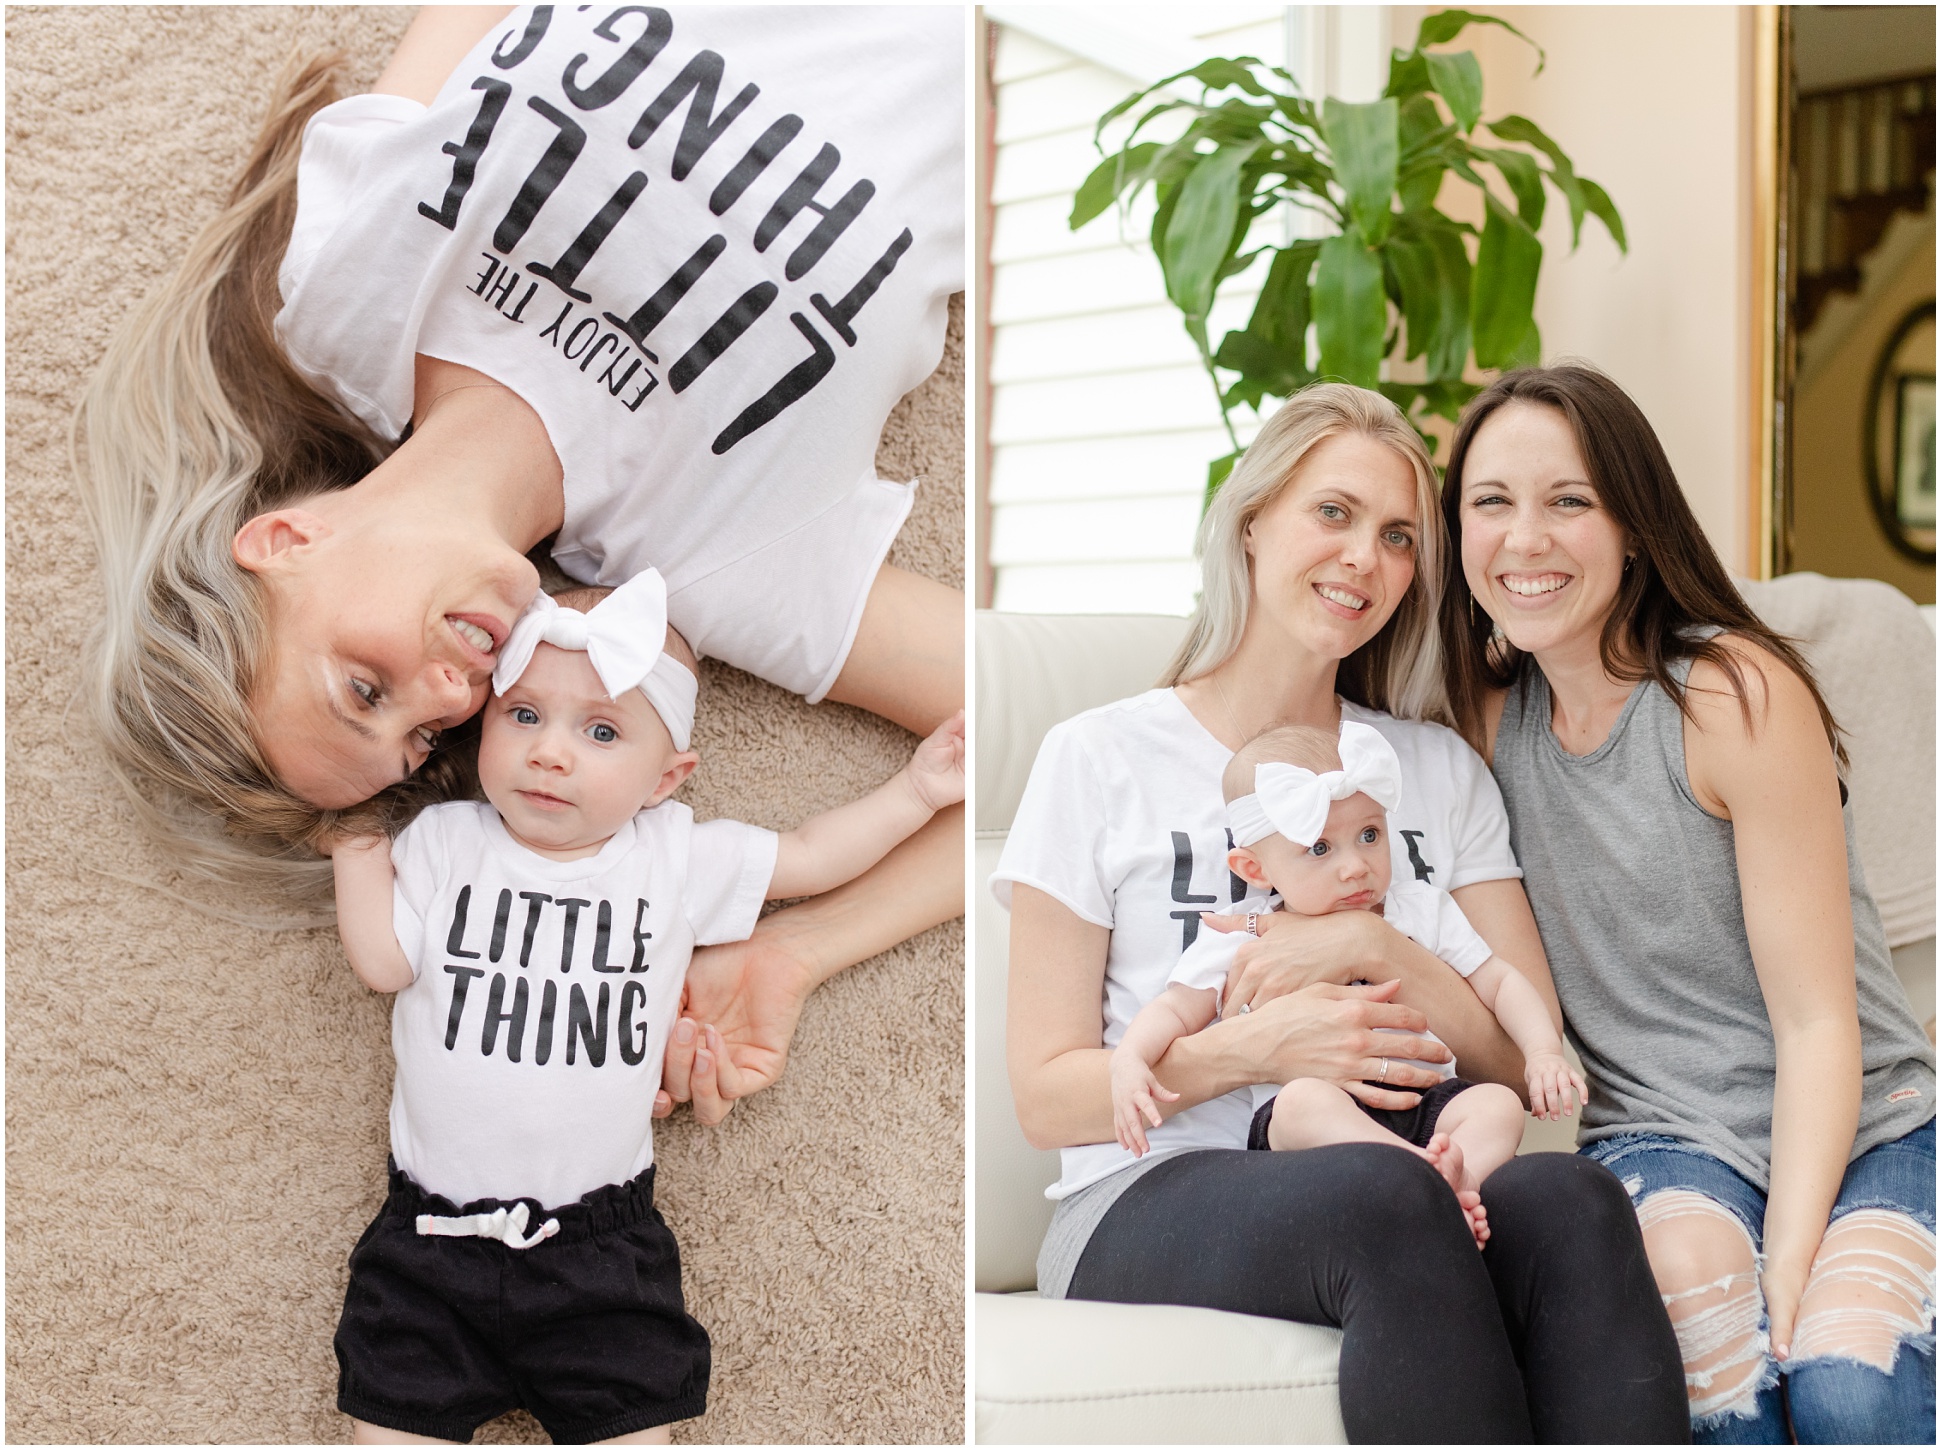 Rebecca and her three month old, Lily wearing matching shirts, Right: Rebecca, Aunt Jes, and baby Lily Sage